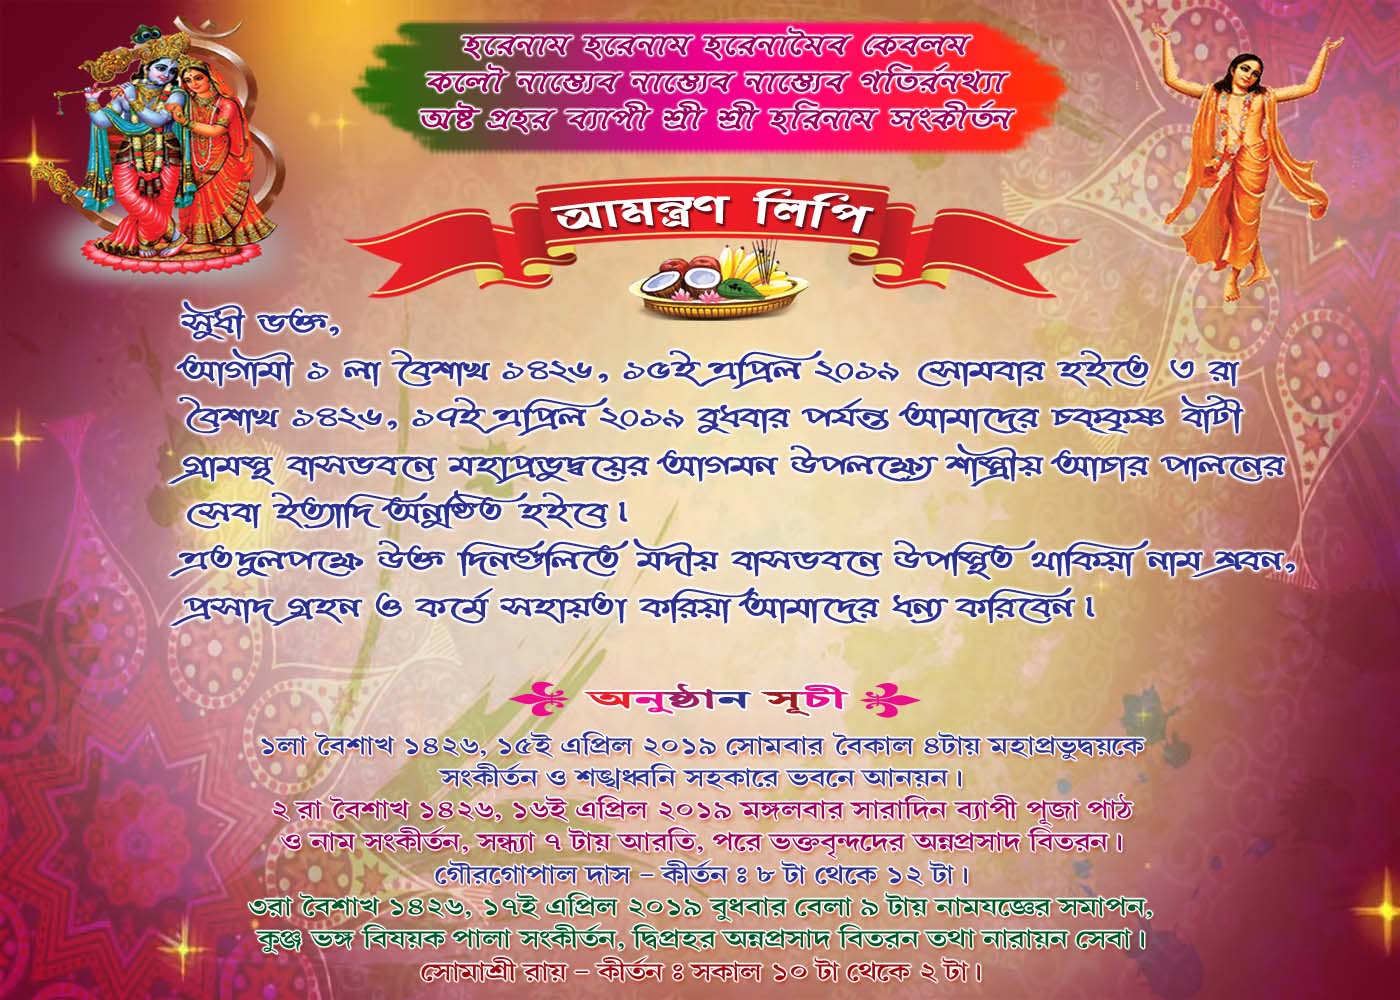 Bengal Puja Invitation Card Picture Density